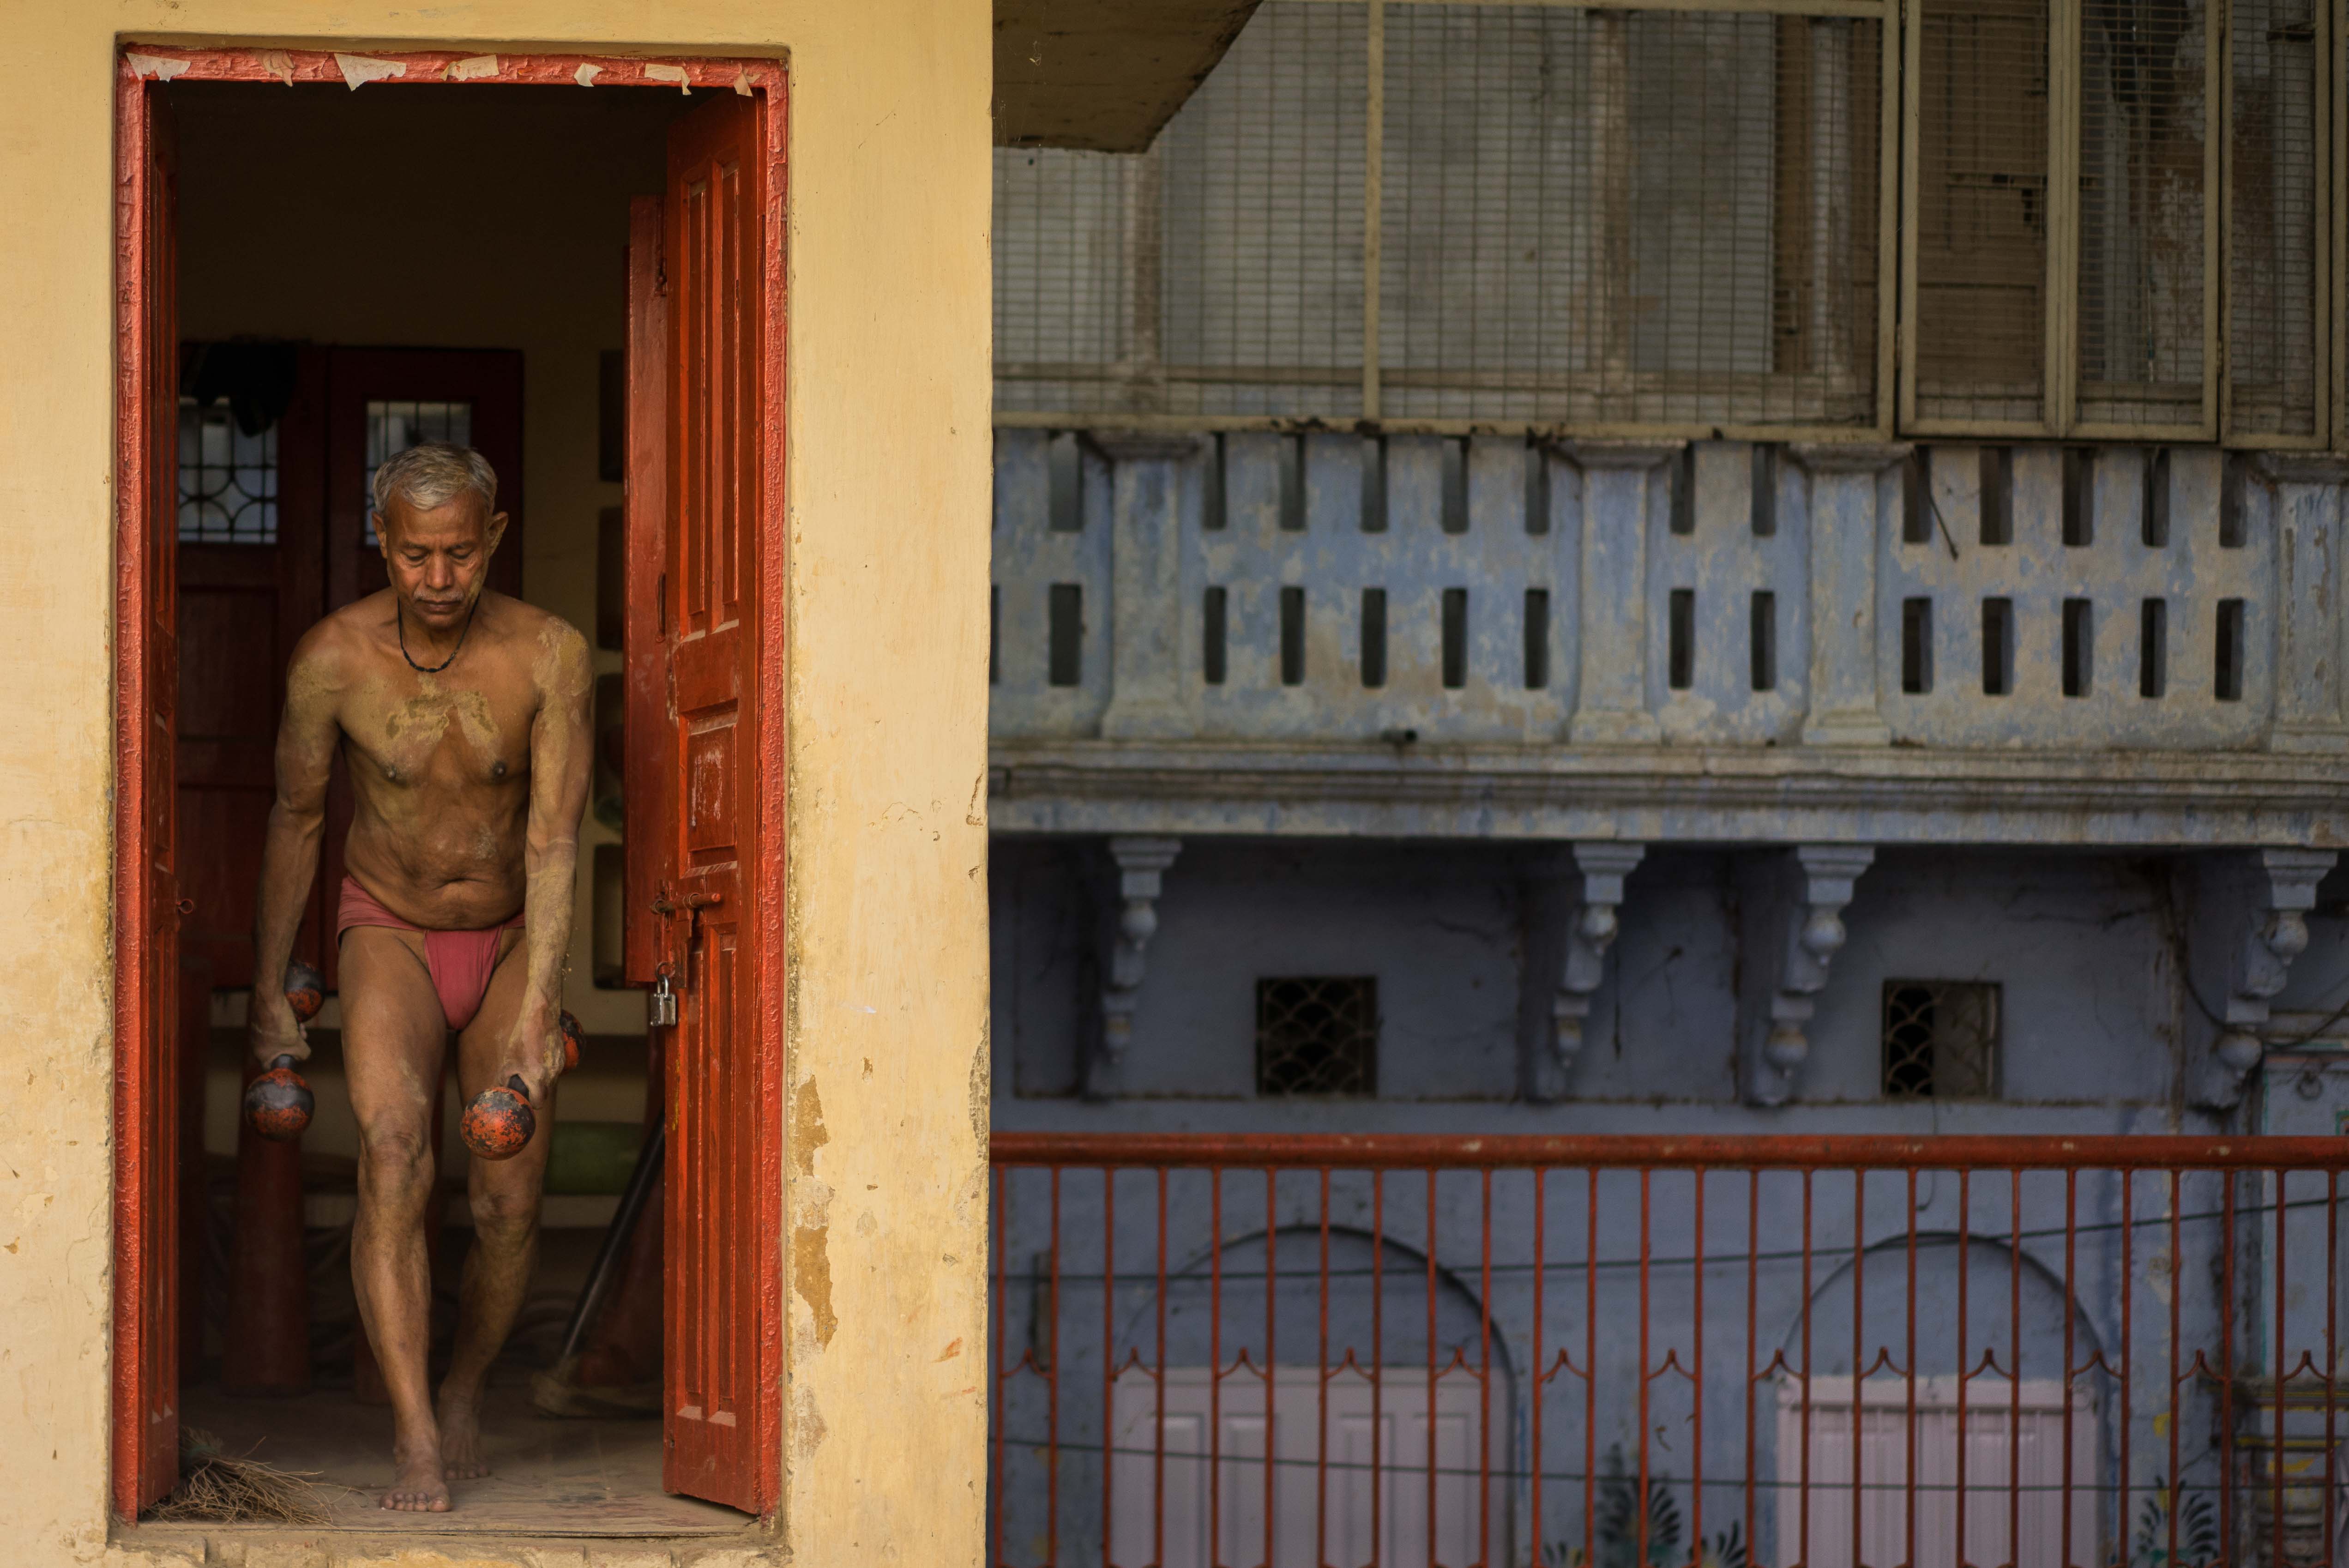 An elderly Kushti wrestler walks out with some weights in preparation for an early morning training session.